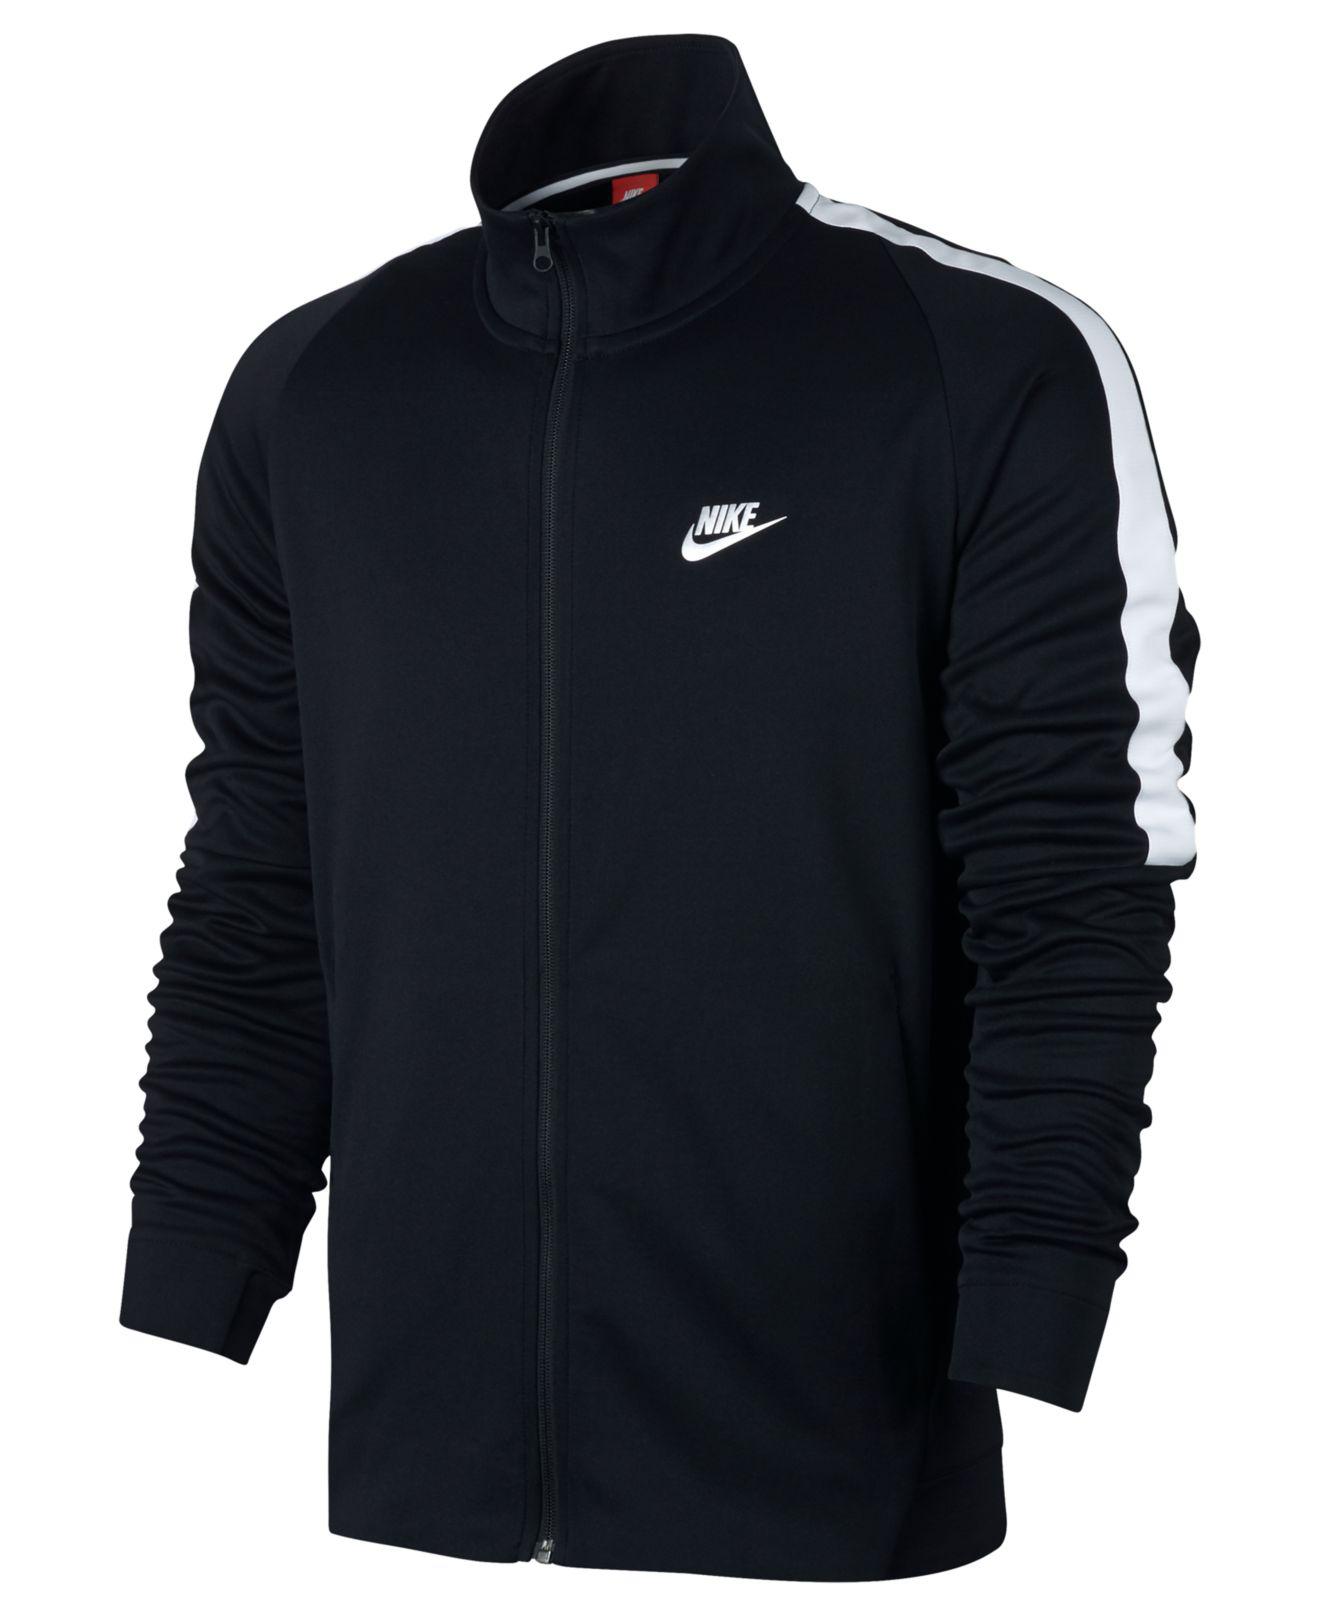 Nike Cotton Tribute Poly Track Jacket In Black for Men - Lyst